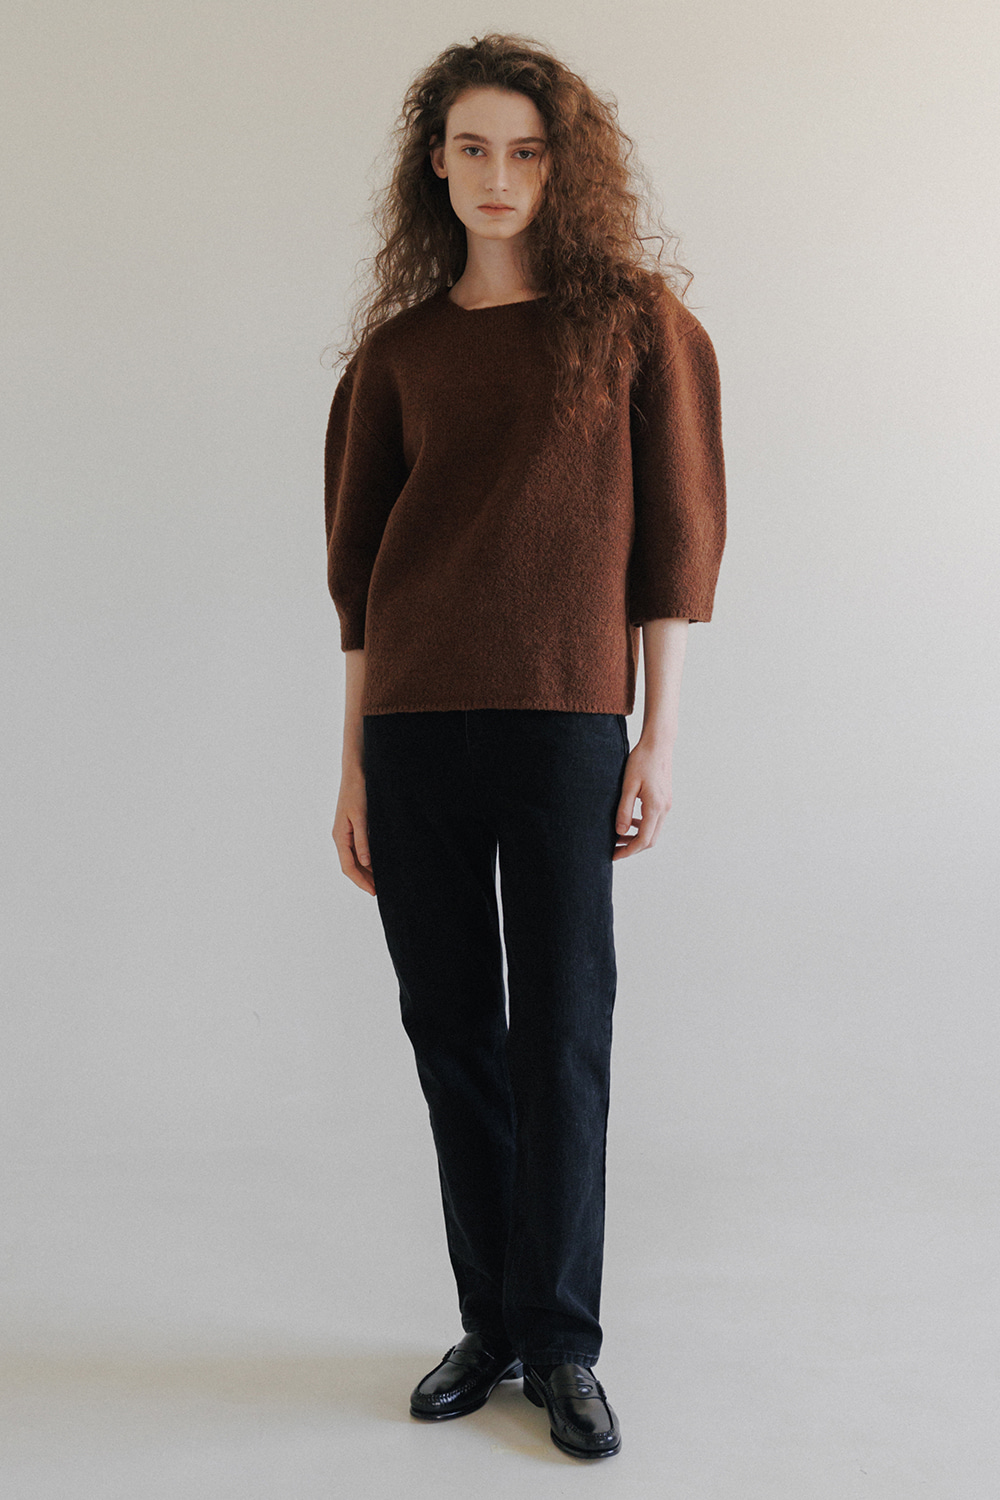 CHAGALL BOUCLE KNIT (BROWN)